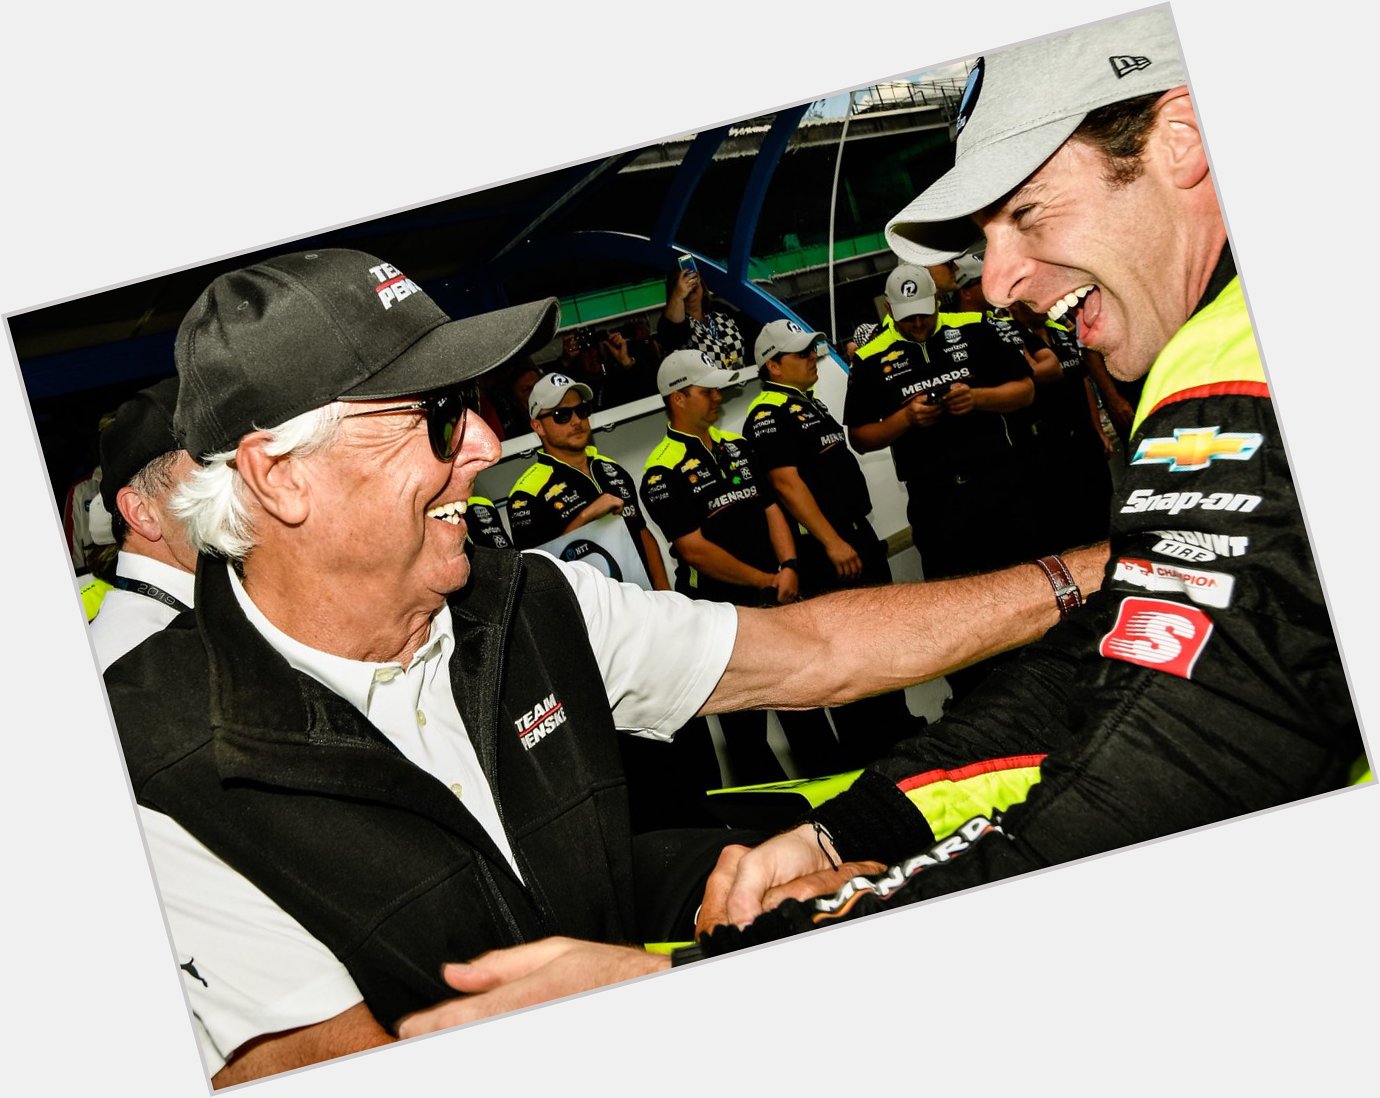 One of the best coaches, drivers and people. Happy birthday to the legend, Rick Mears. 